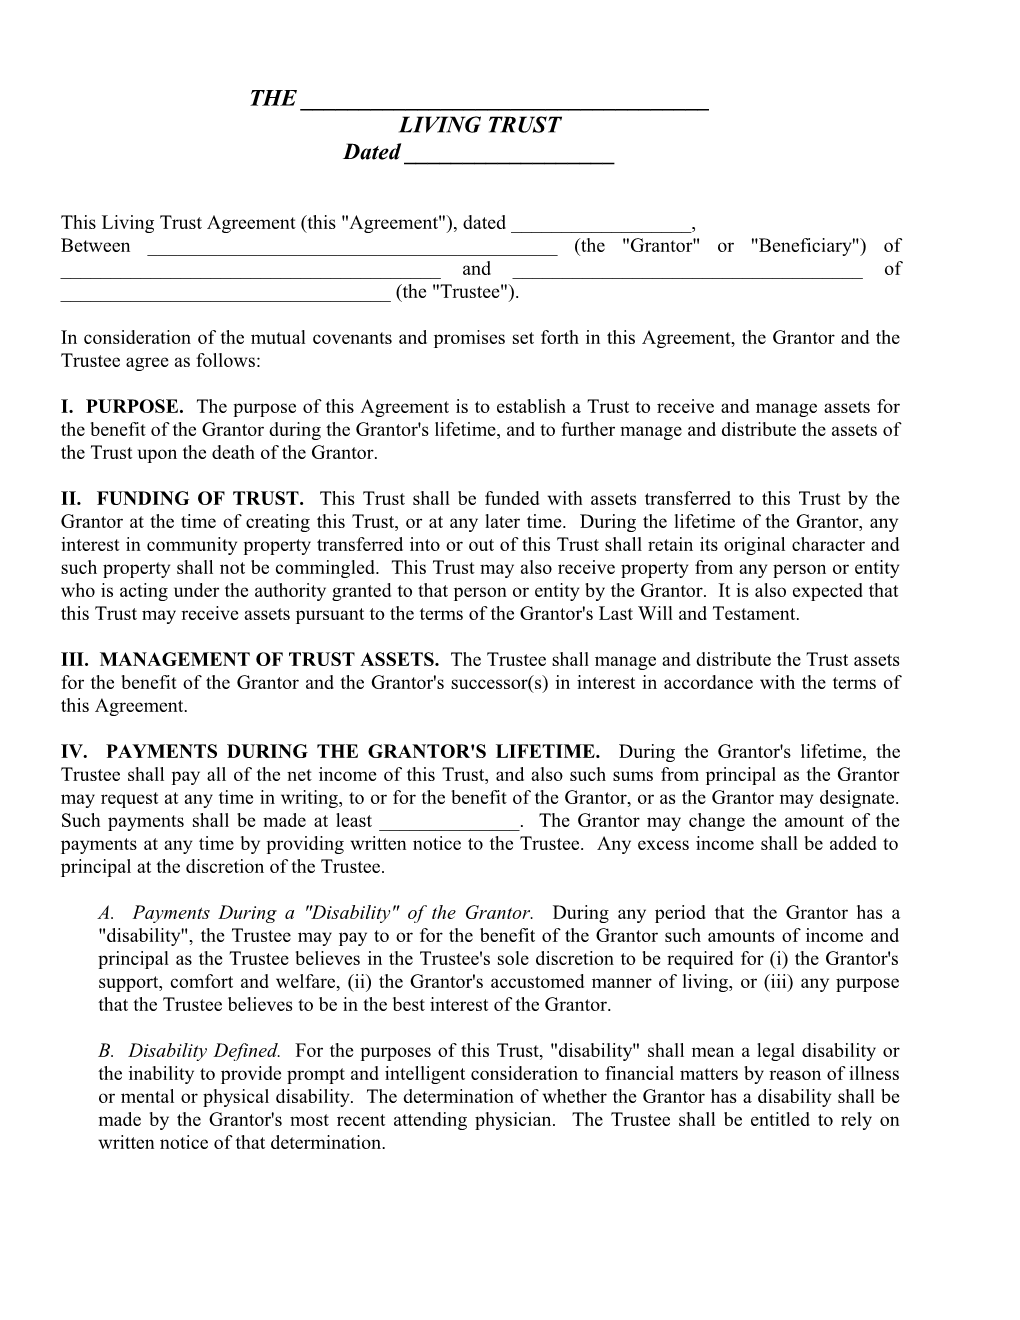 This Living Trust Agreement (This Agreement ), Dated ______